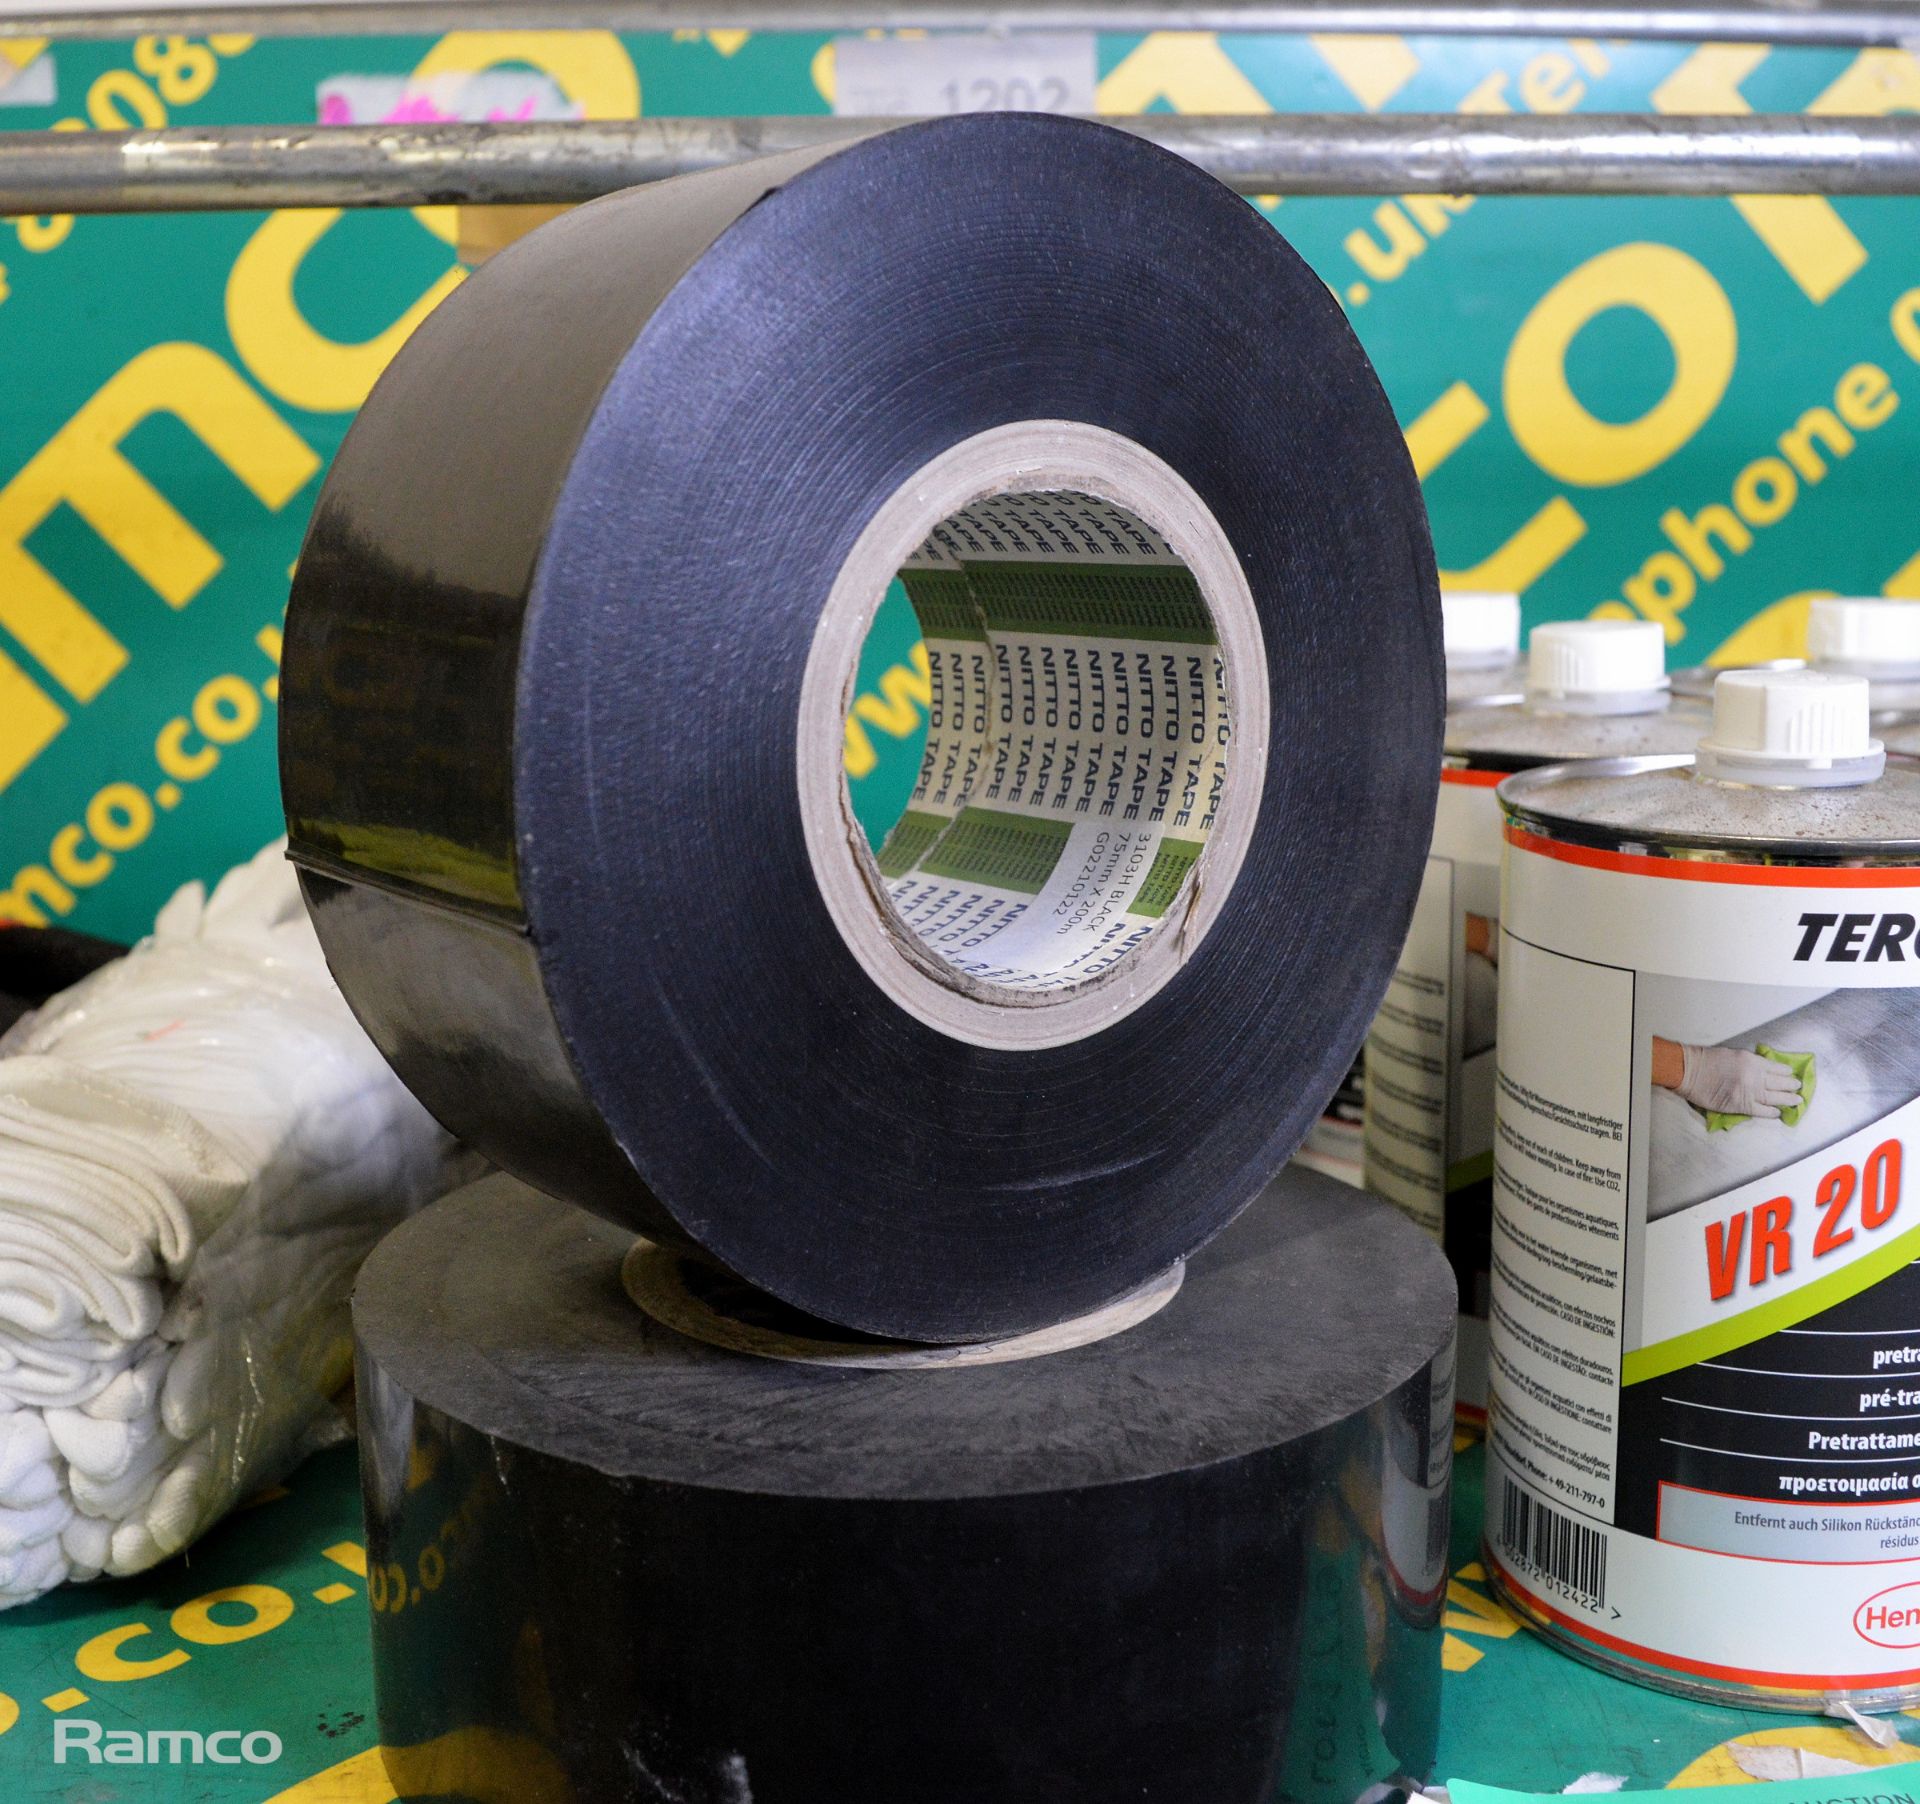 3x Nitto Tape rolls, 5x Teroson VR20 pretreatment, Permaplugs, various work gloves - Image 3 of 6